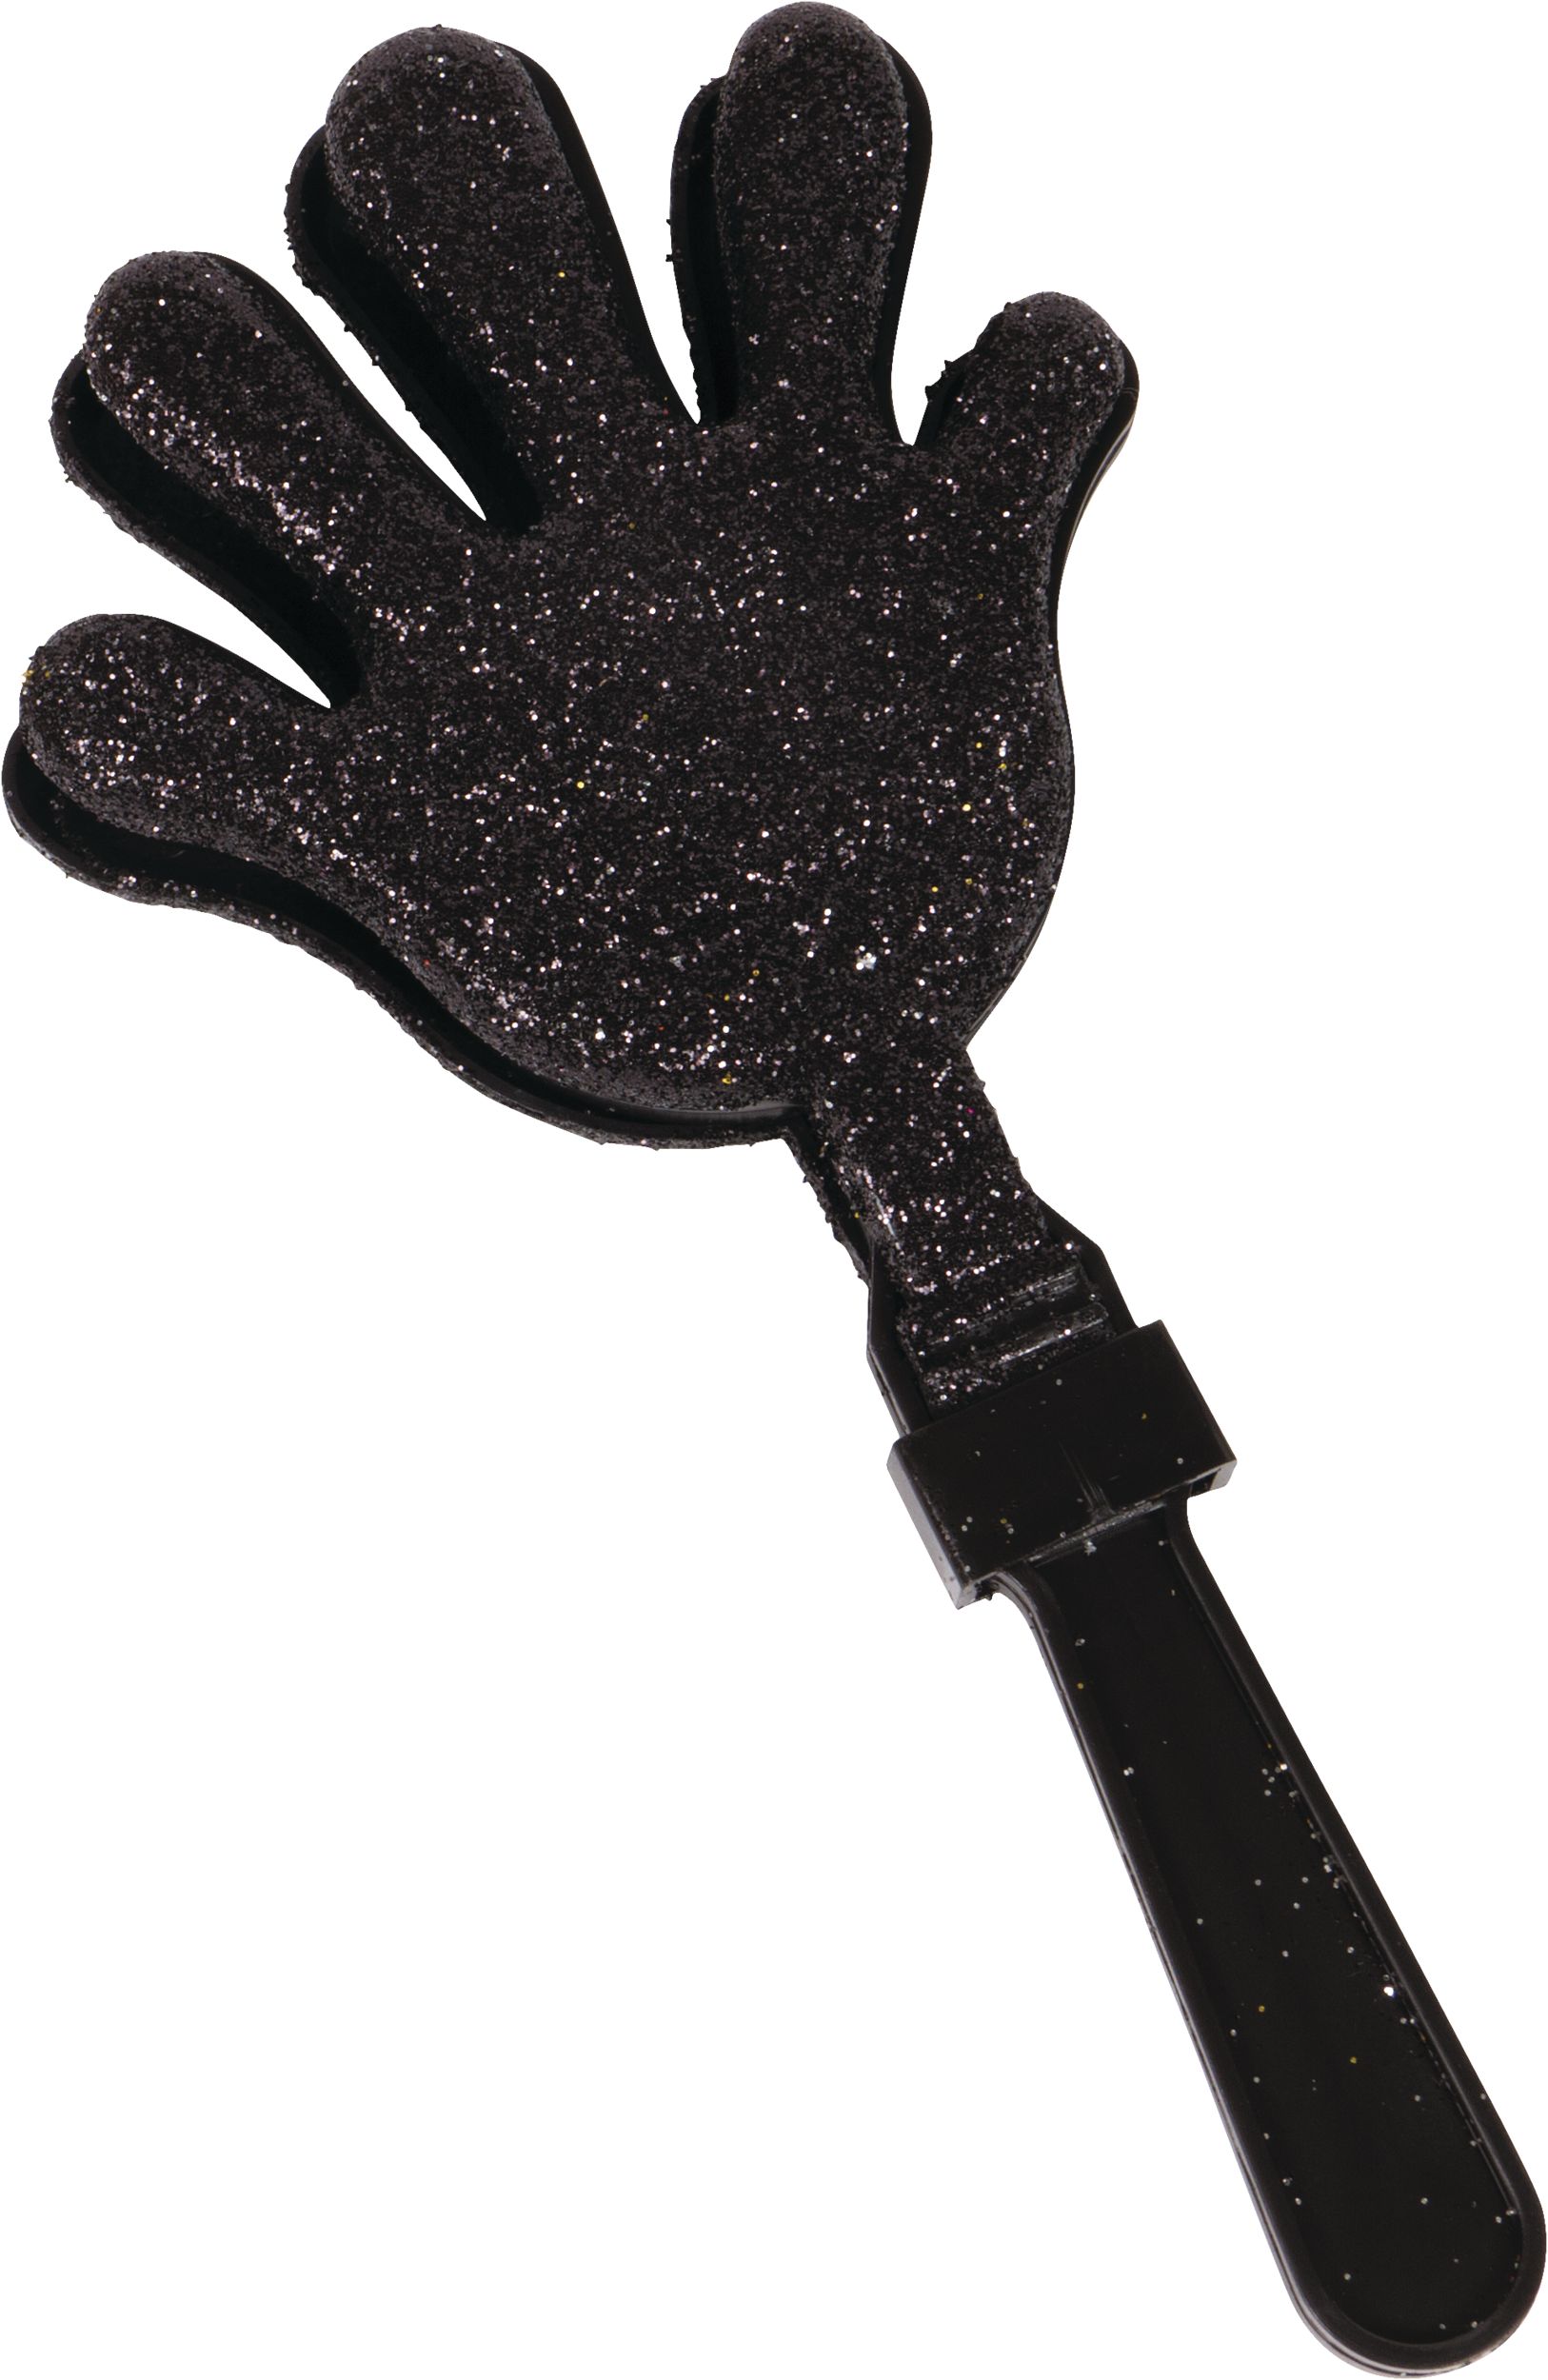 Hand Clappers - 12 Ct.